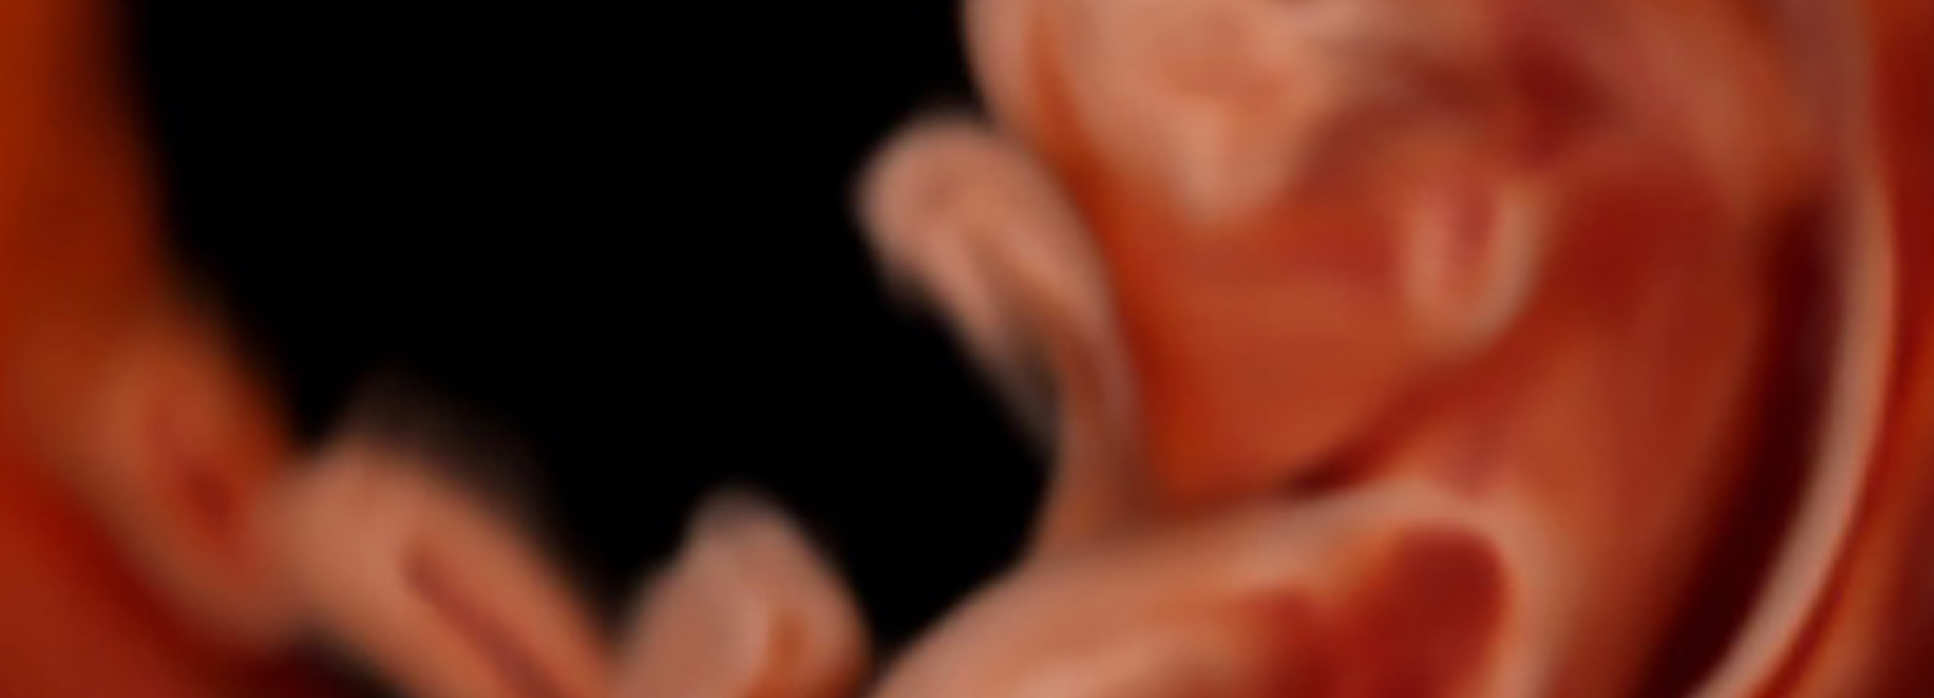 Baby in the womb